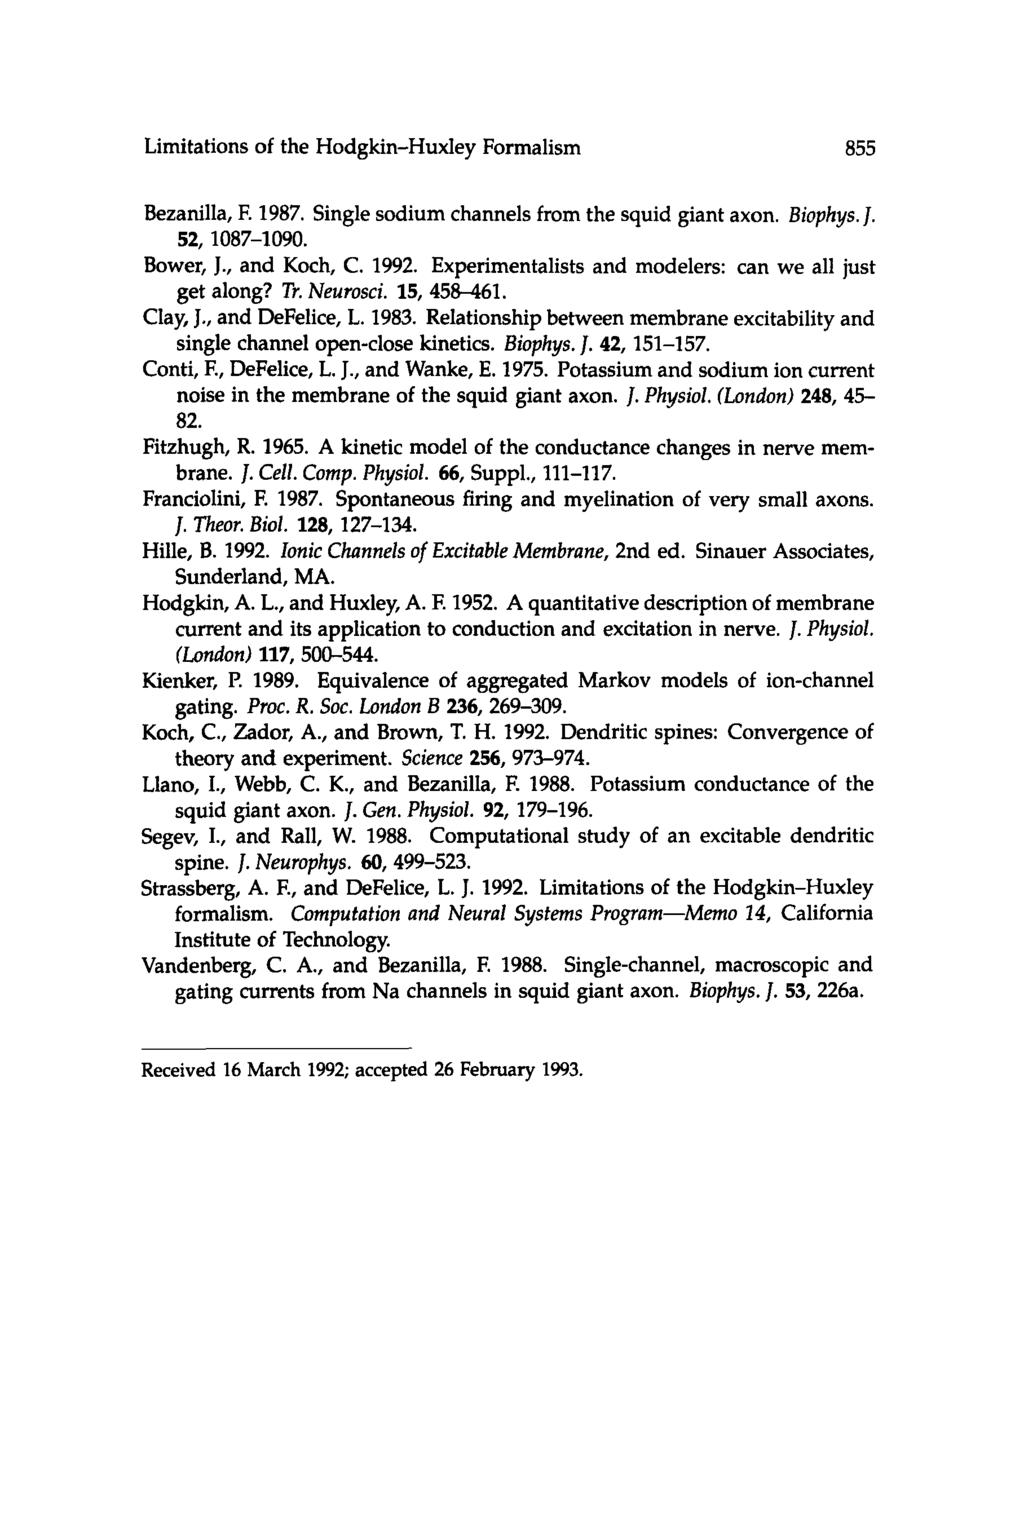 Limitations of the Hodgkin-Hwdey Formalism 855 Bezanilla, F. 1987. Single sodium channels from the squid giant axon. Biophys. J. 52, 1087-1090. Bower, J., and Koch, C. 1992.